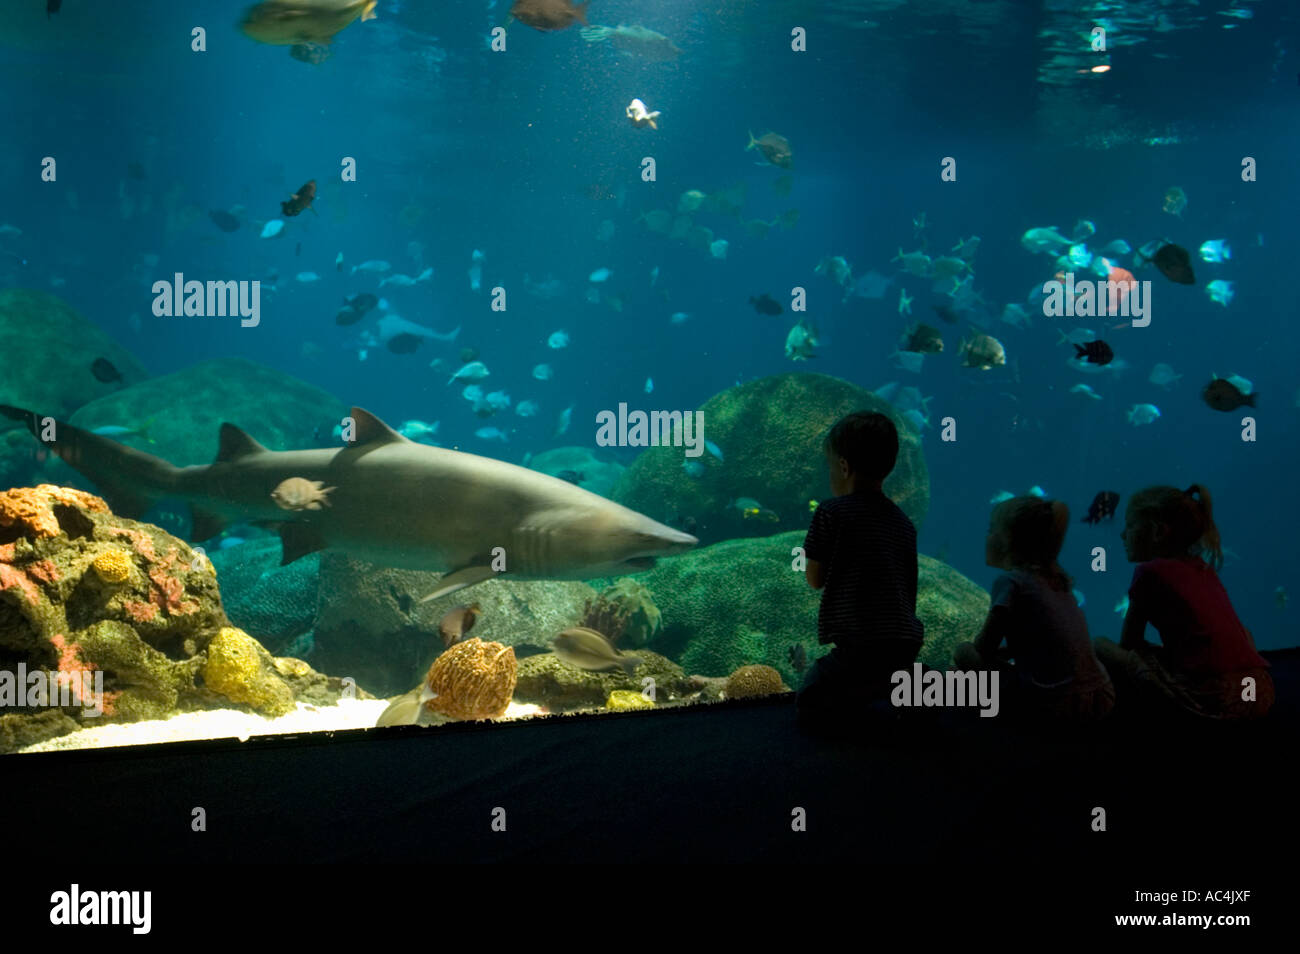 Children getting a close look at a shark at the Tennessee Aquarium in Chattanooga, Tennessee. Stock Photo